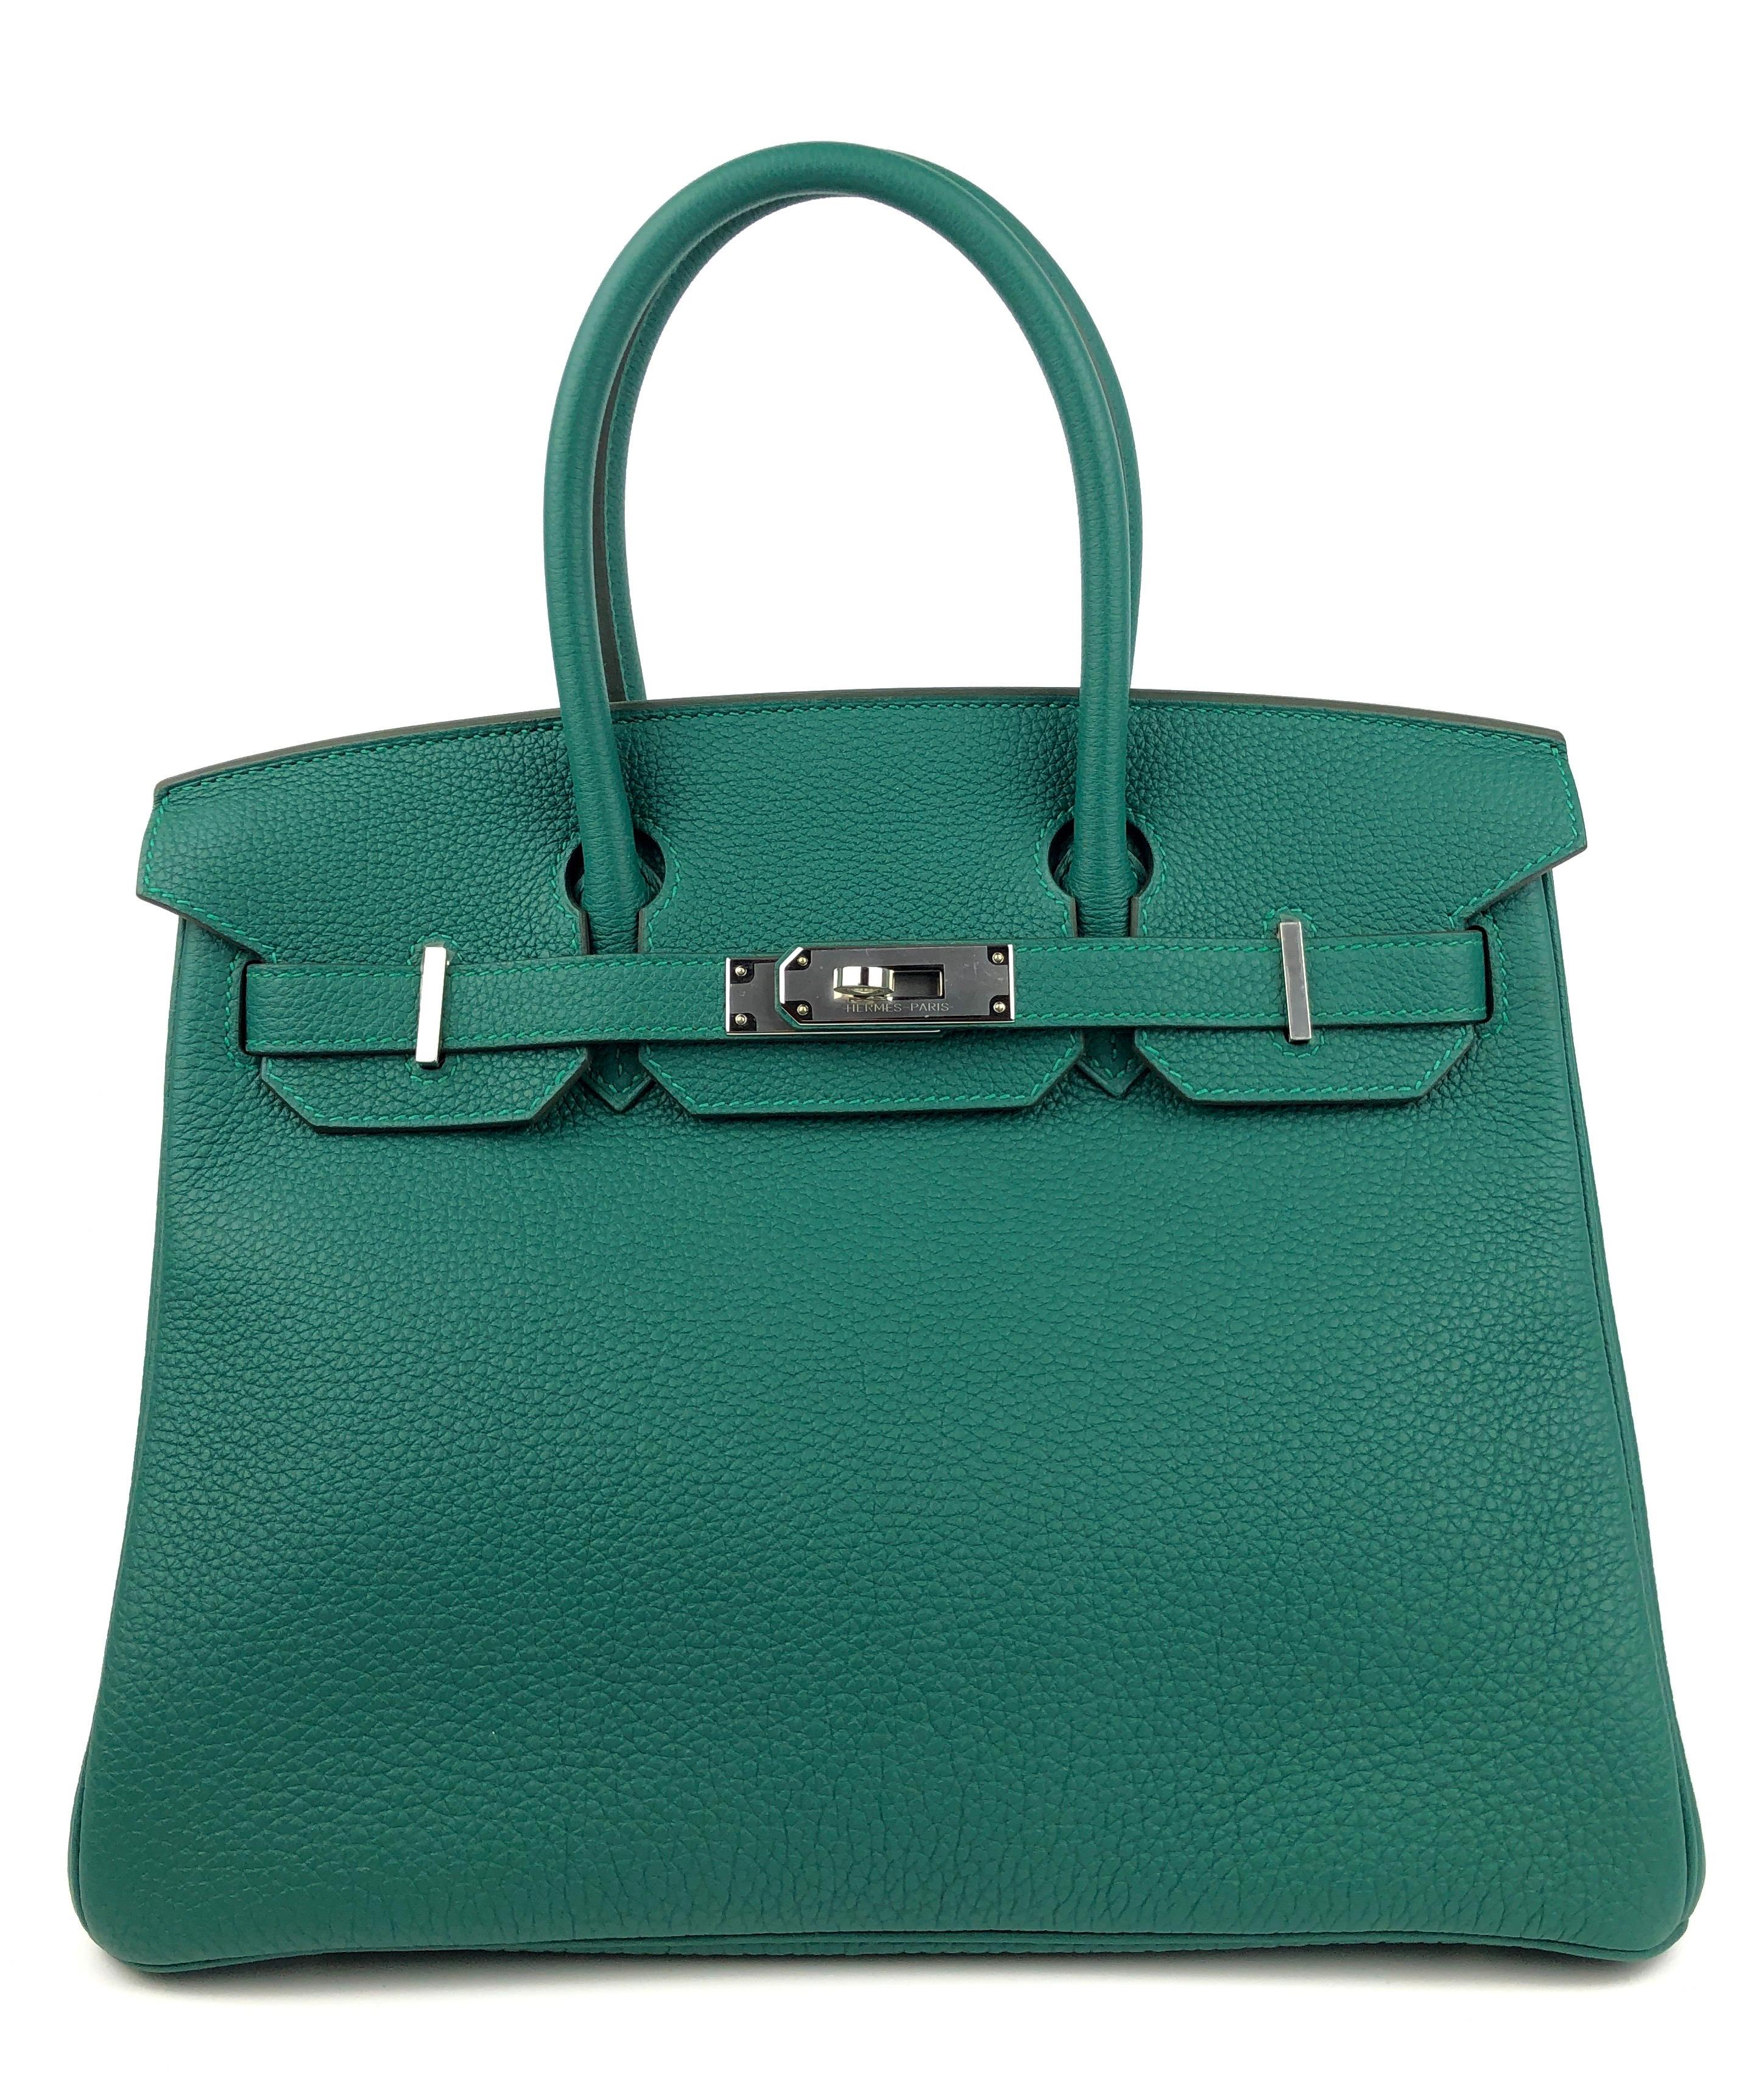 NEW Stunning Hermes Birkin 30 Malachite Green Palladium Hardware. D Stamp 2019.
No Box.

Shop with Confidence from Lux Addicts. Authenticity Guaranteed!